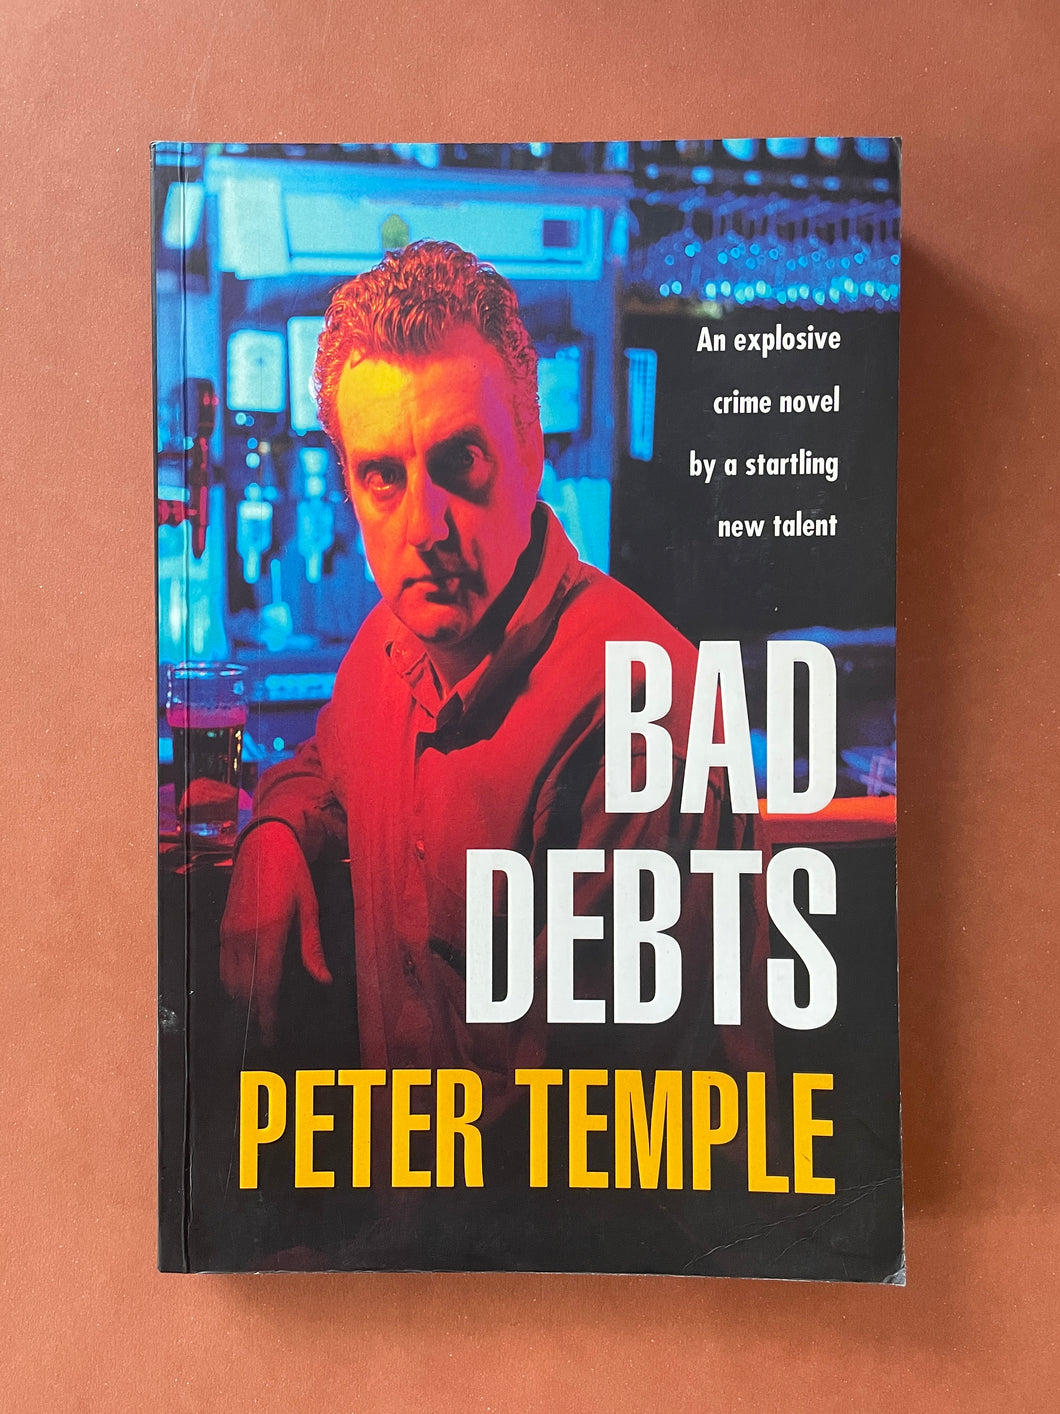 Bad Debts by Peter Temple: photo of the front cover which shows very minor scratching, and obvious creasing on the bottom-left corner.